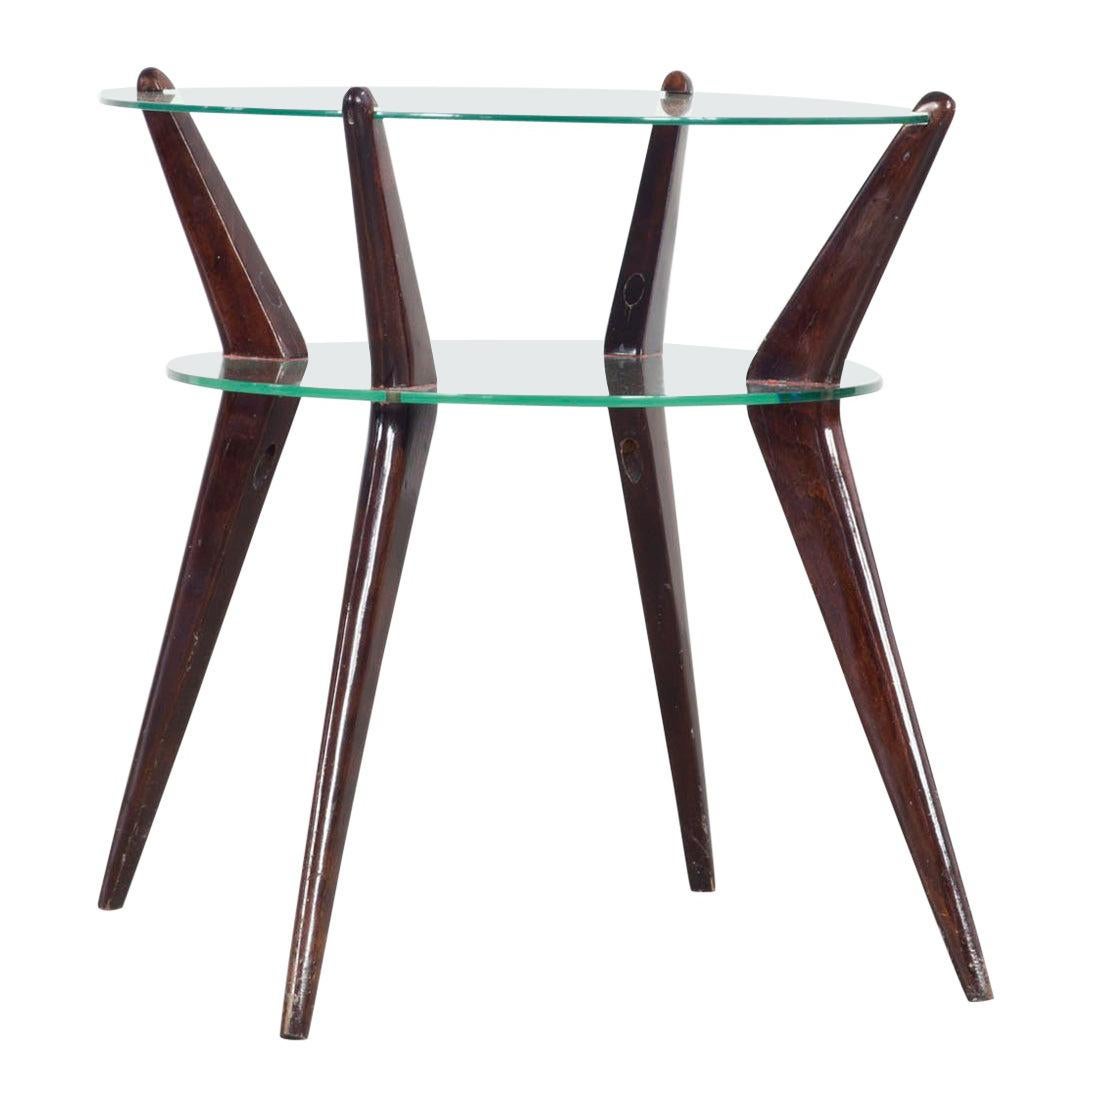 Italian Coffee Table with Legs of Dark Stained Wood and Glass Top, 1950s